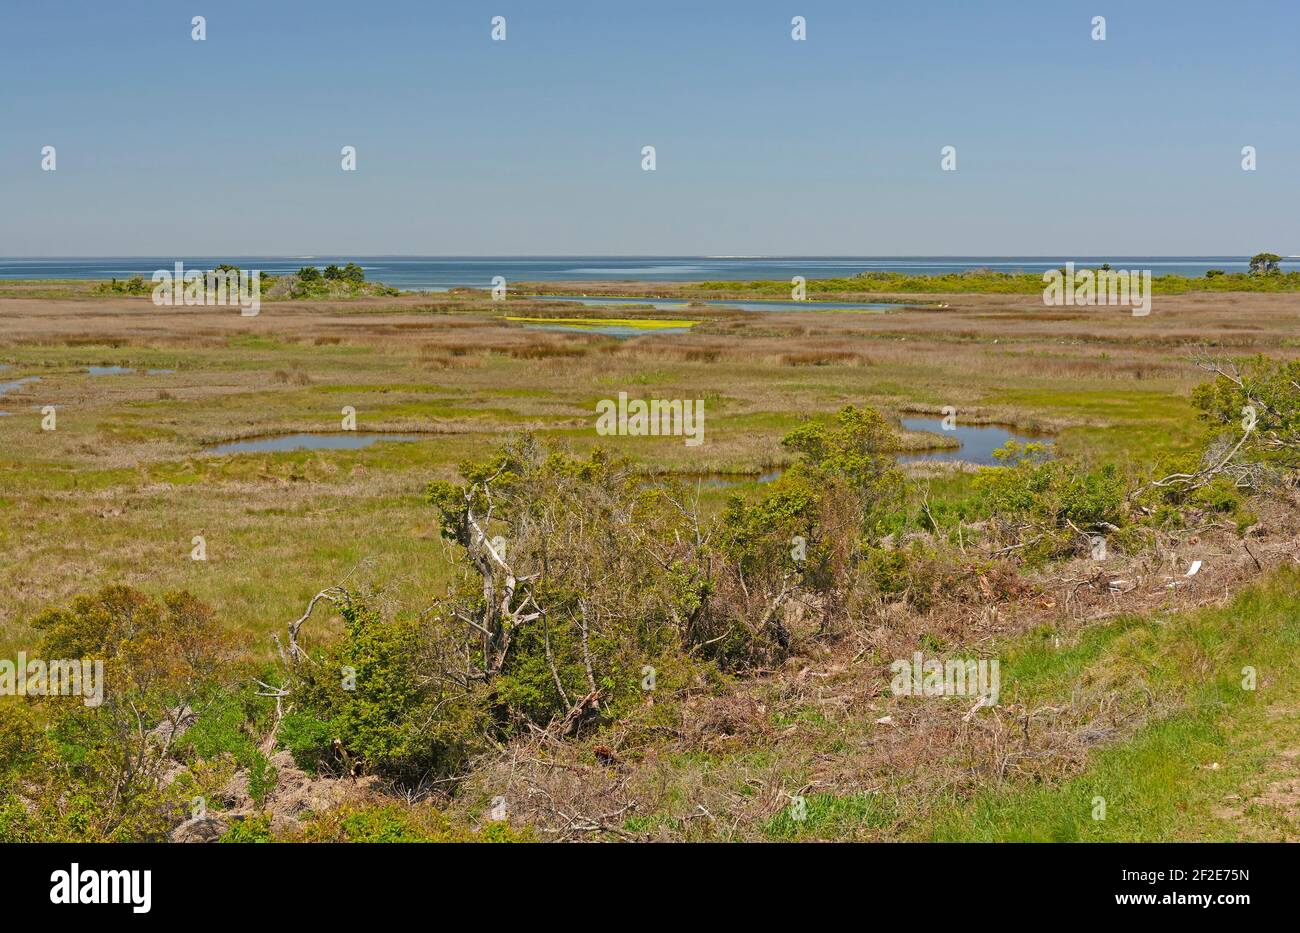 Wetlands on the Pea Island Wildlife Refuge on the Barrier Islands of Cape Hatteras in North Carolina Stock Photo